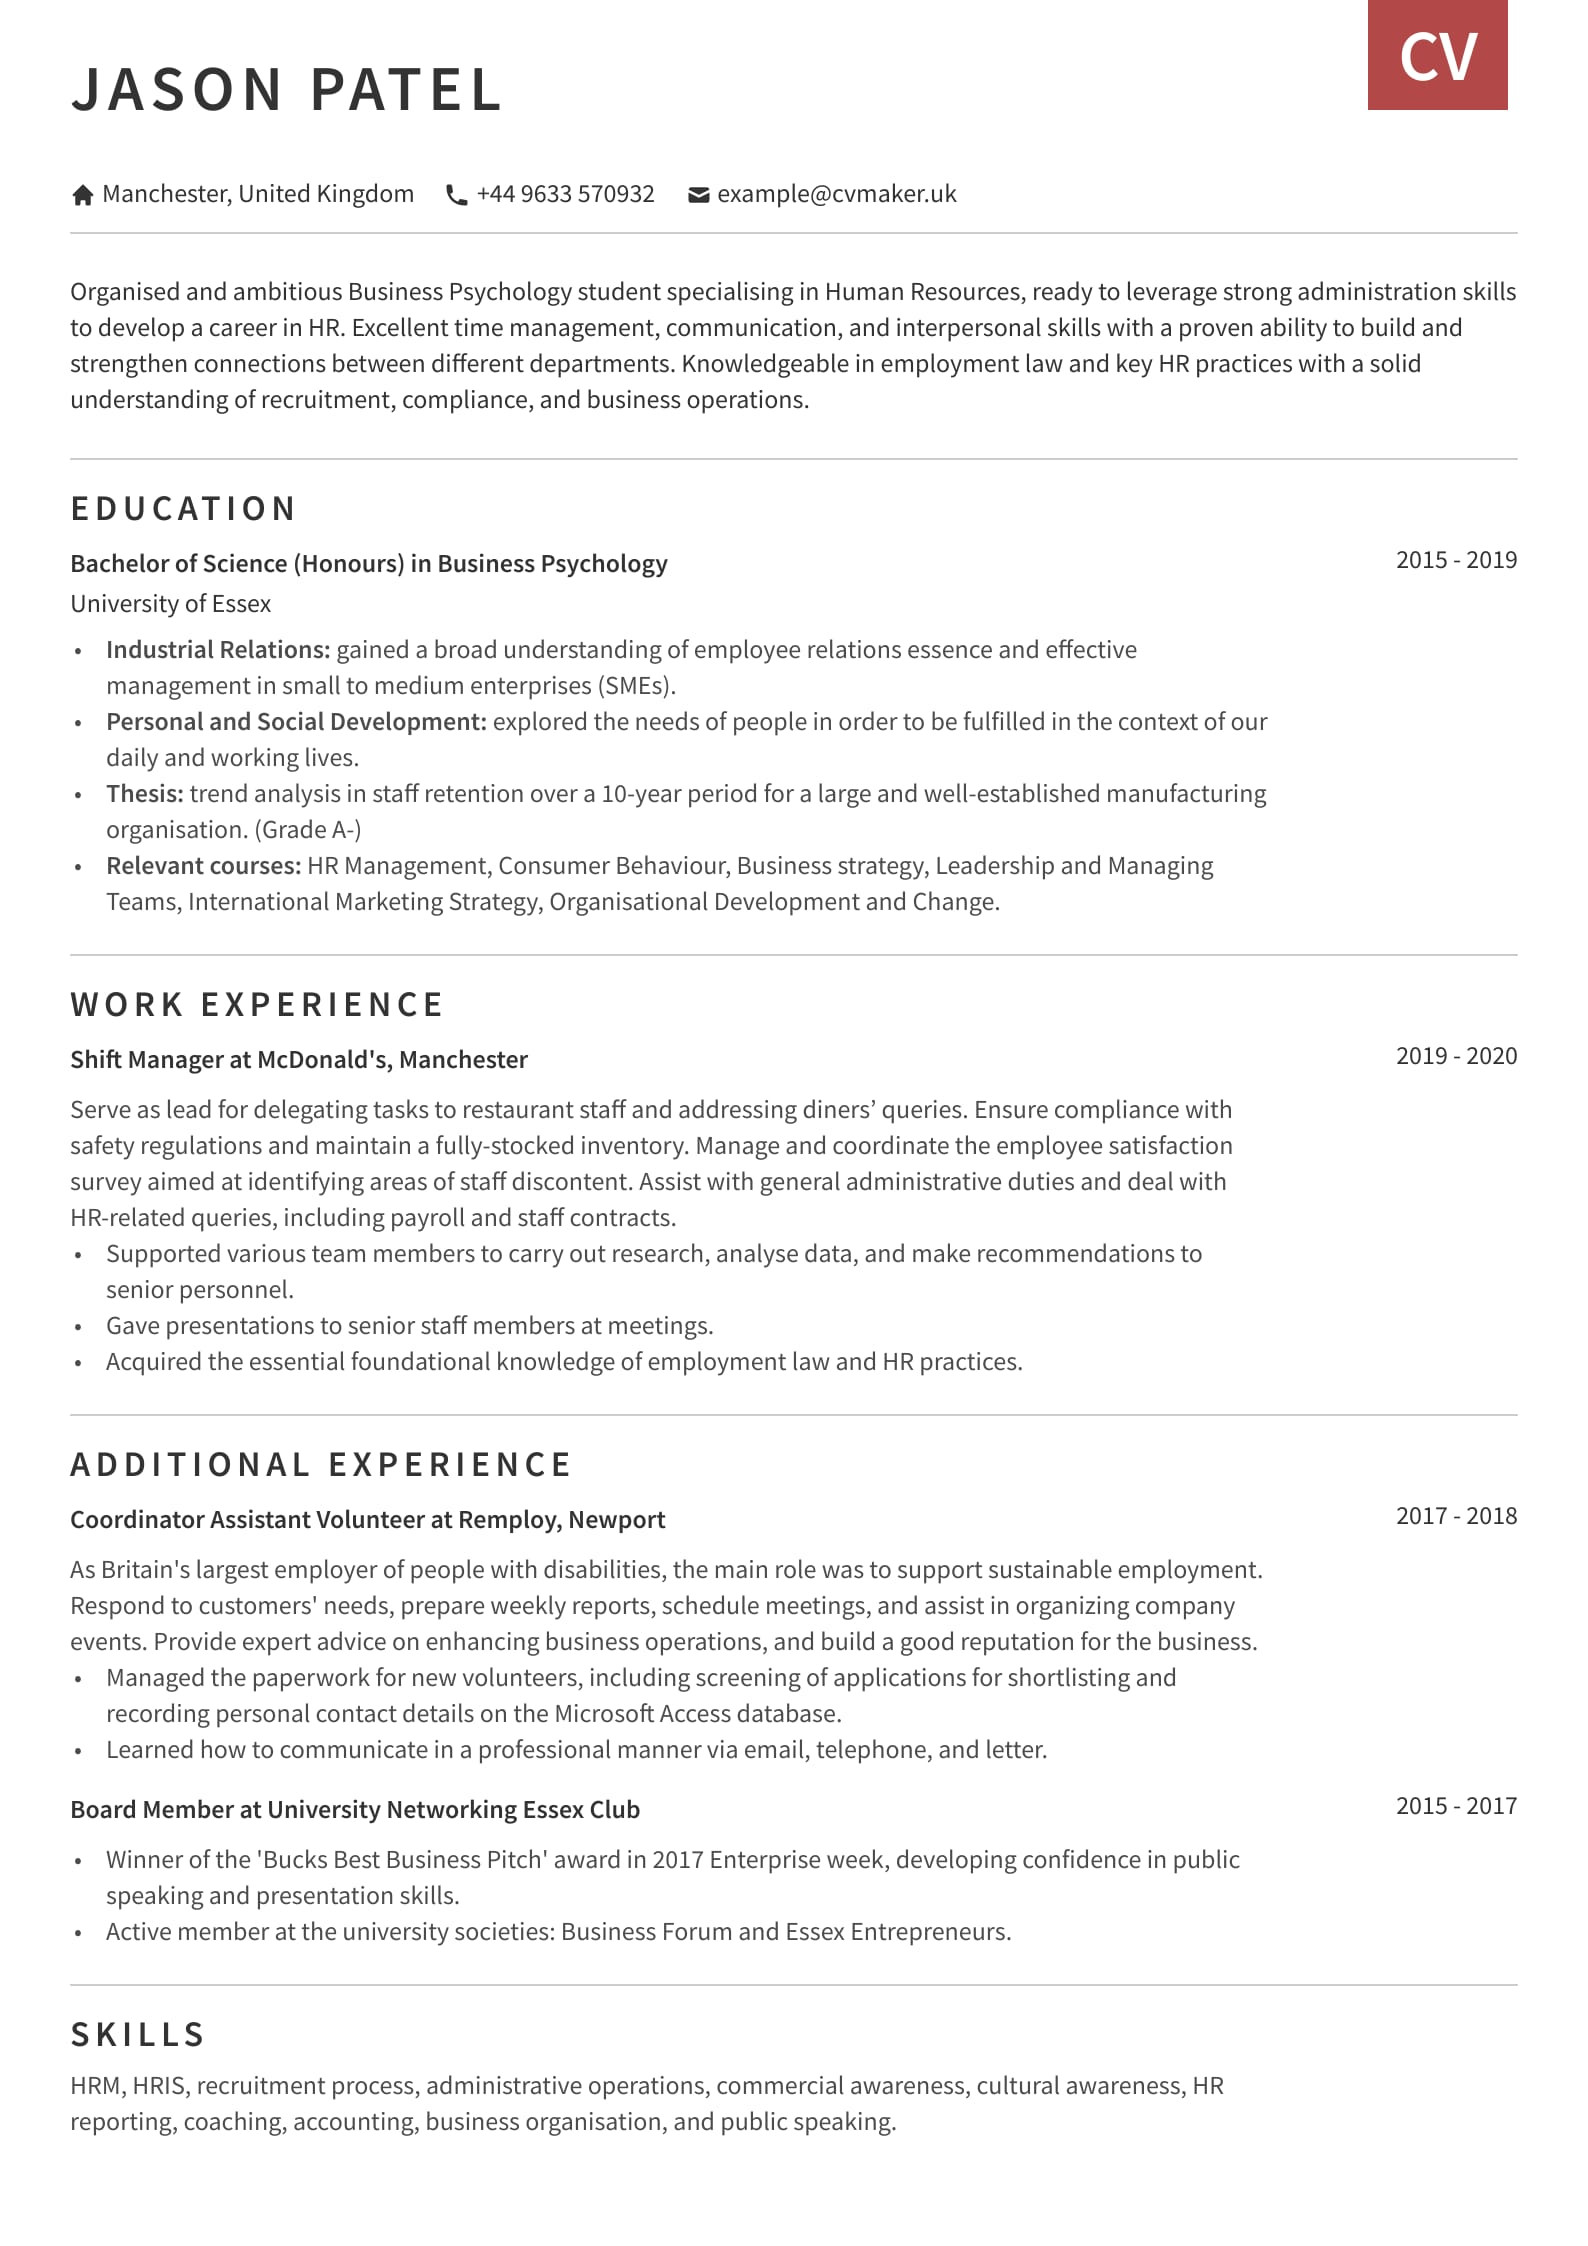 Resume Gaps Student Application Undergraduate Sample Student Cv – Land More Interviews with Our Tips and Examples